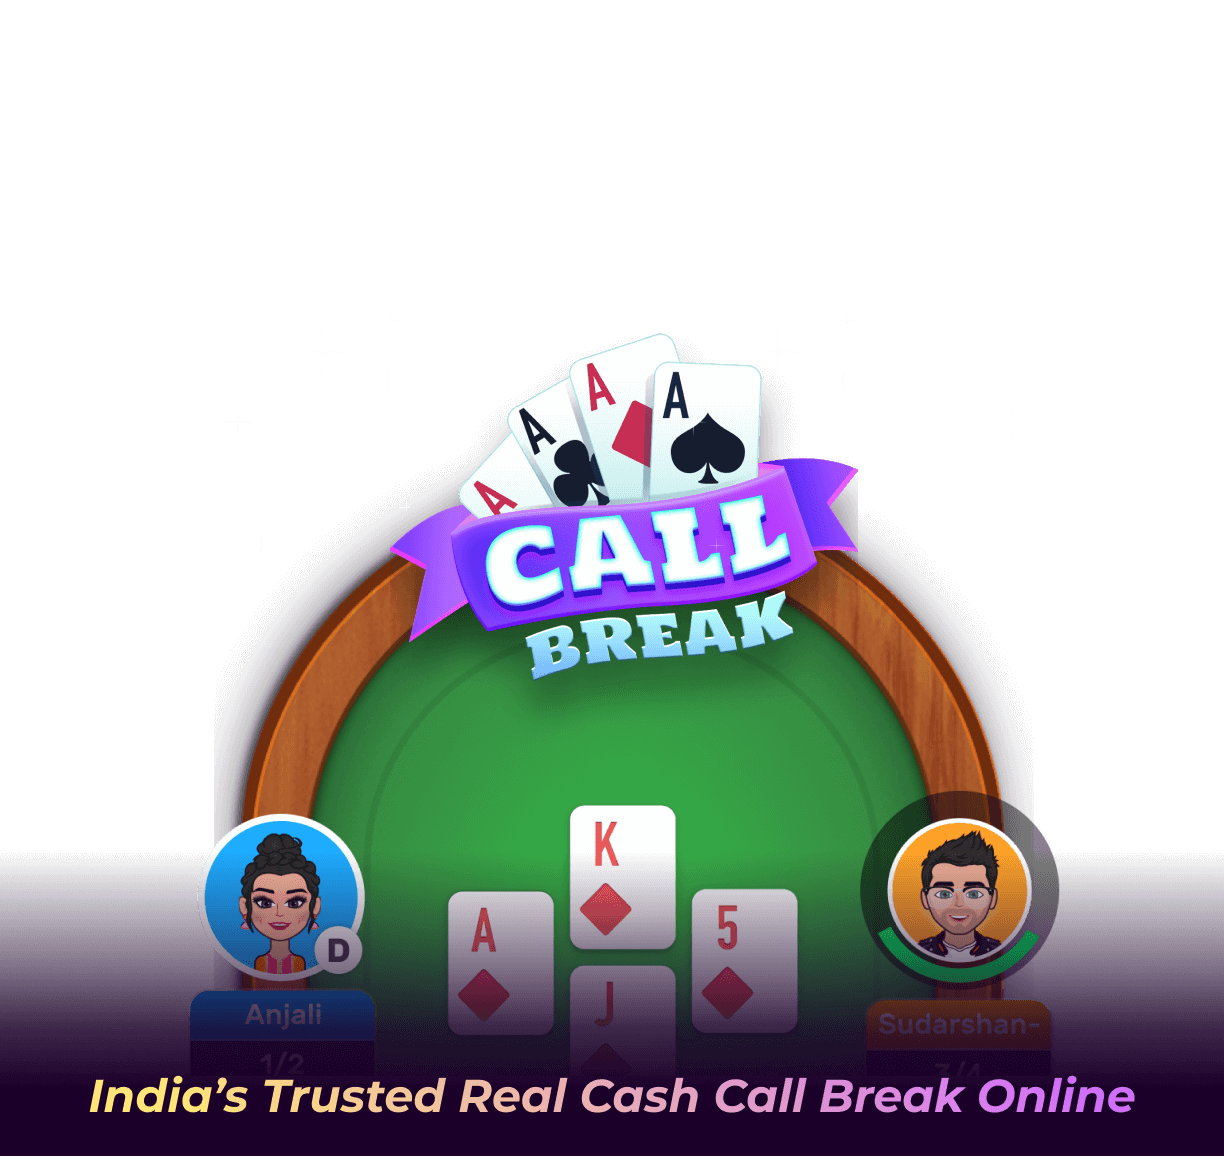 Play Free Fruit Cut Game Online & Win Upto ₹70 Lac Daily